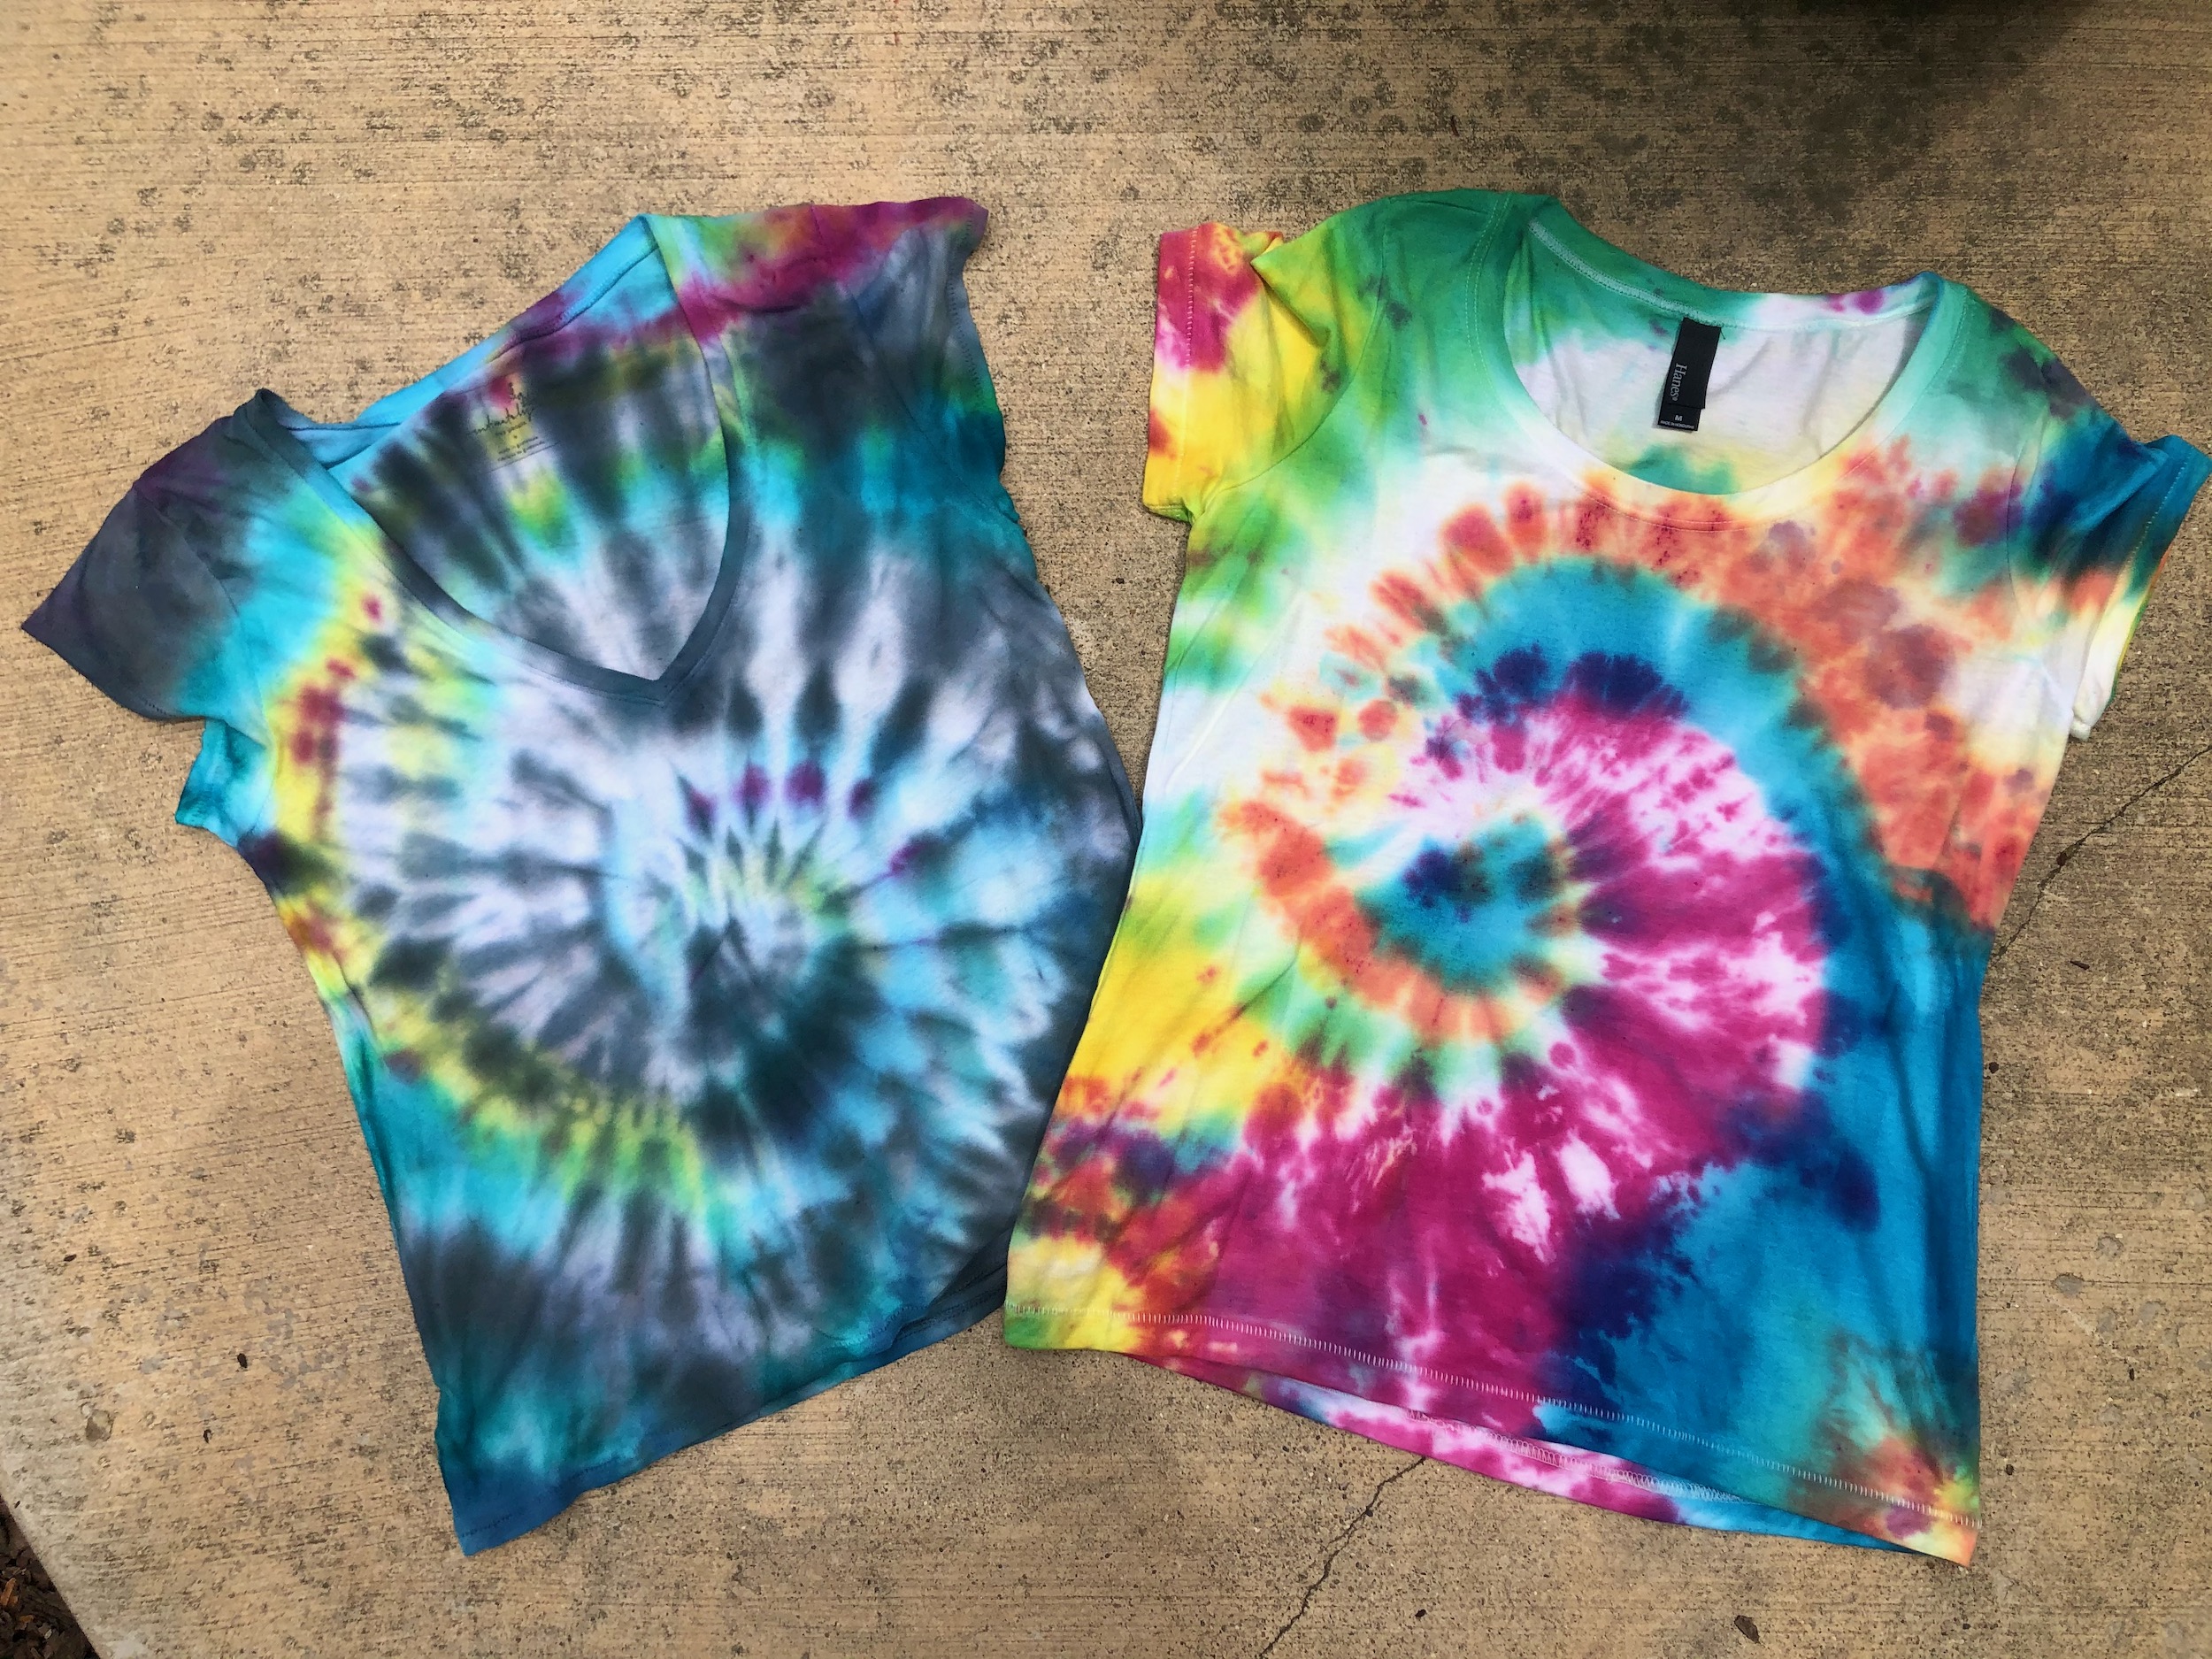 How To Tie-Dye A T-Shirt - The Sister Project Blog